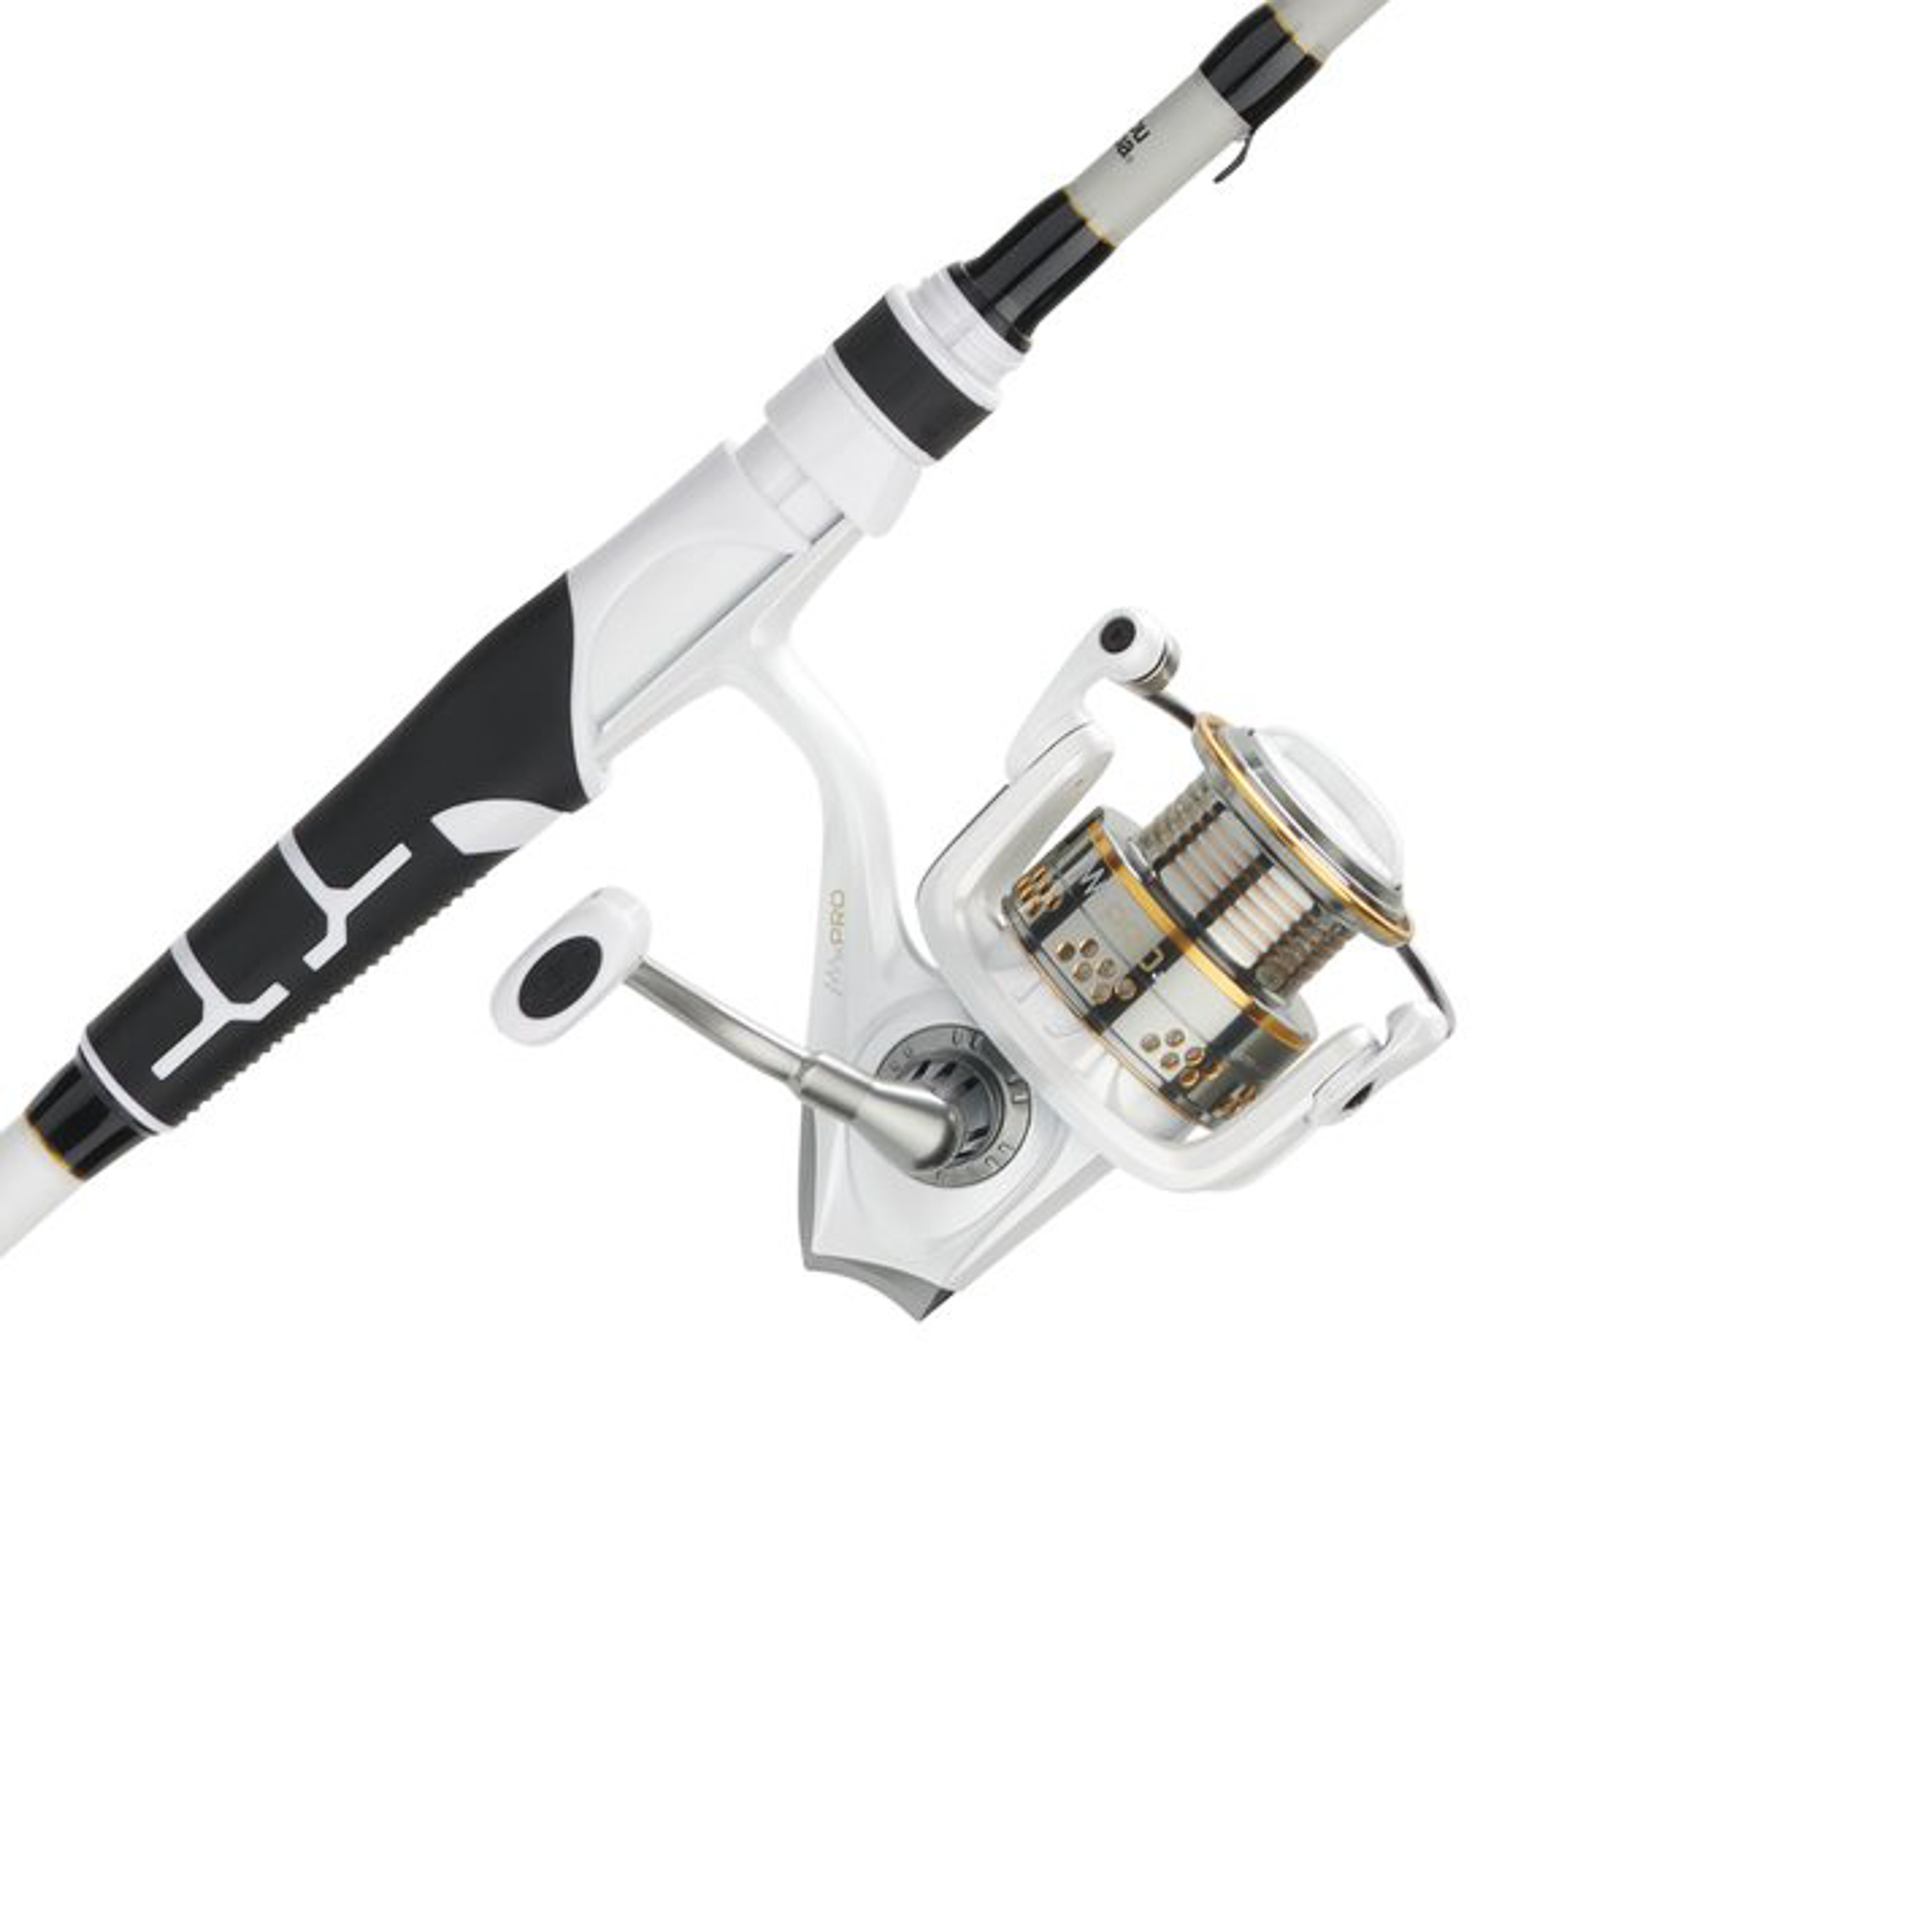 Abu Garcia Max Pro Spinning Rod and Reel Combo with Berkley Flicker Shad Bait Kit - image 5 of 6